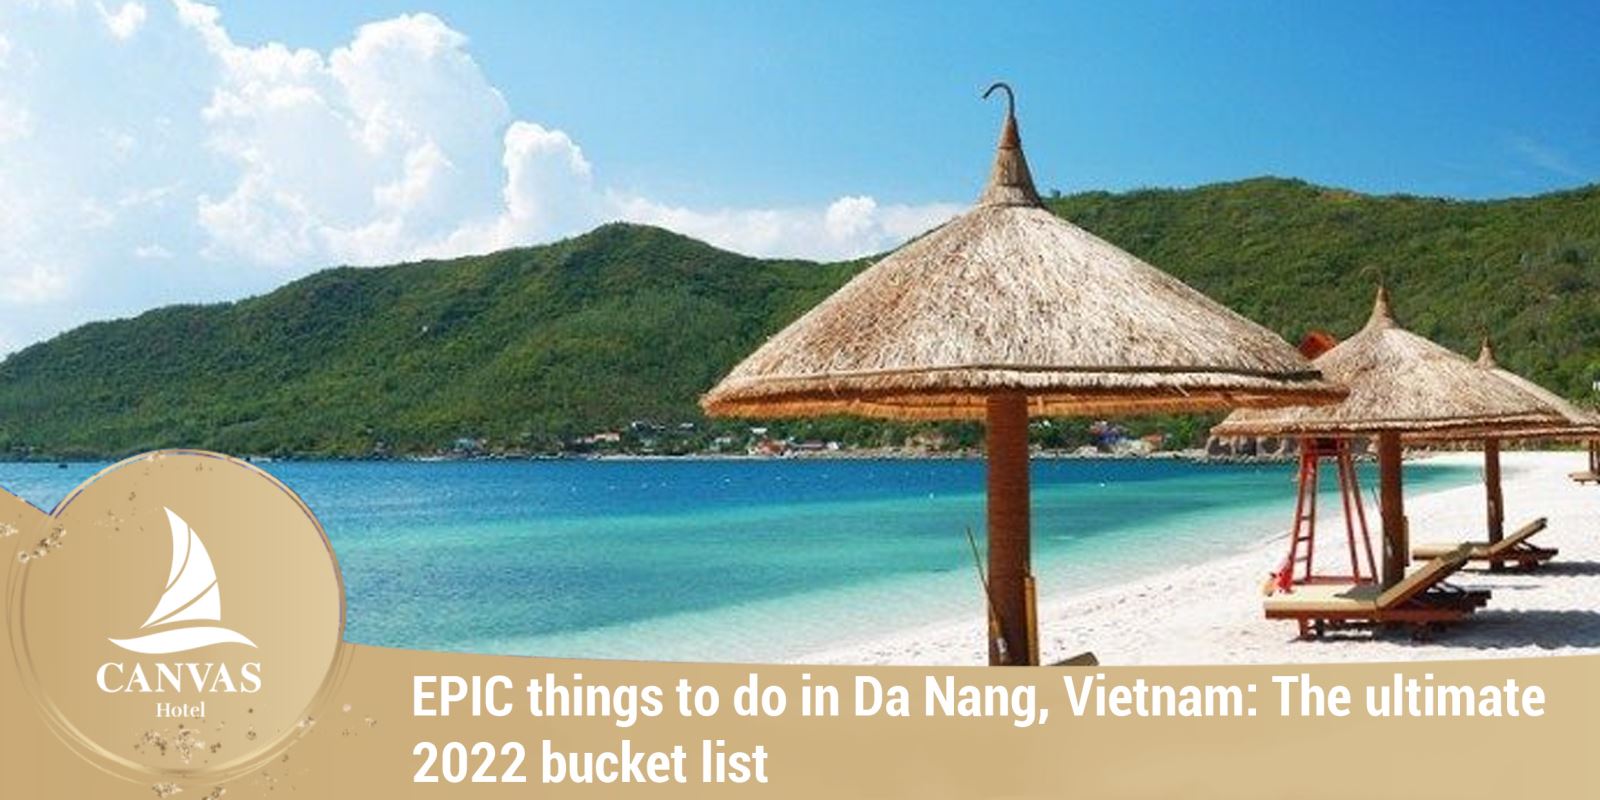 EPIC things to do in Da Nang, Vietnam: The ultimate 2022 bucket list